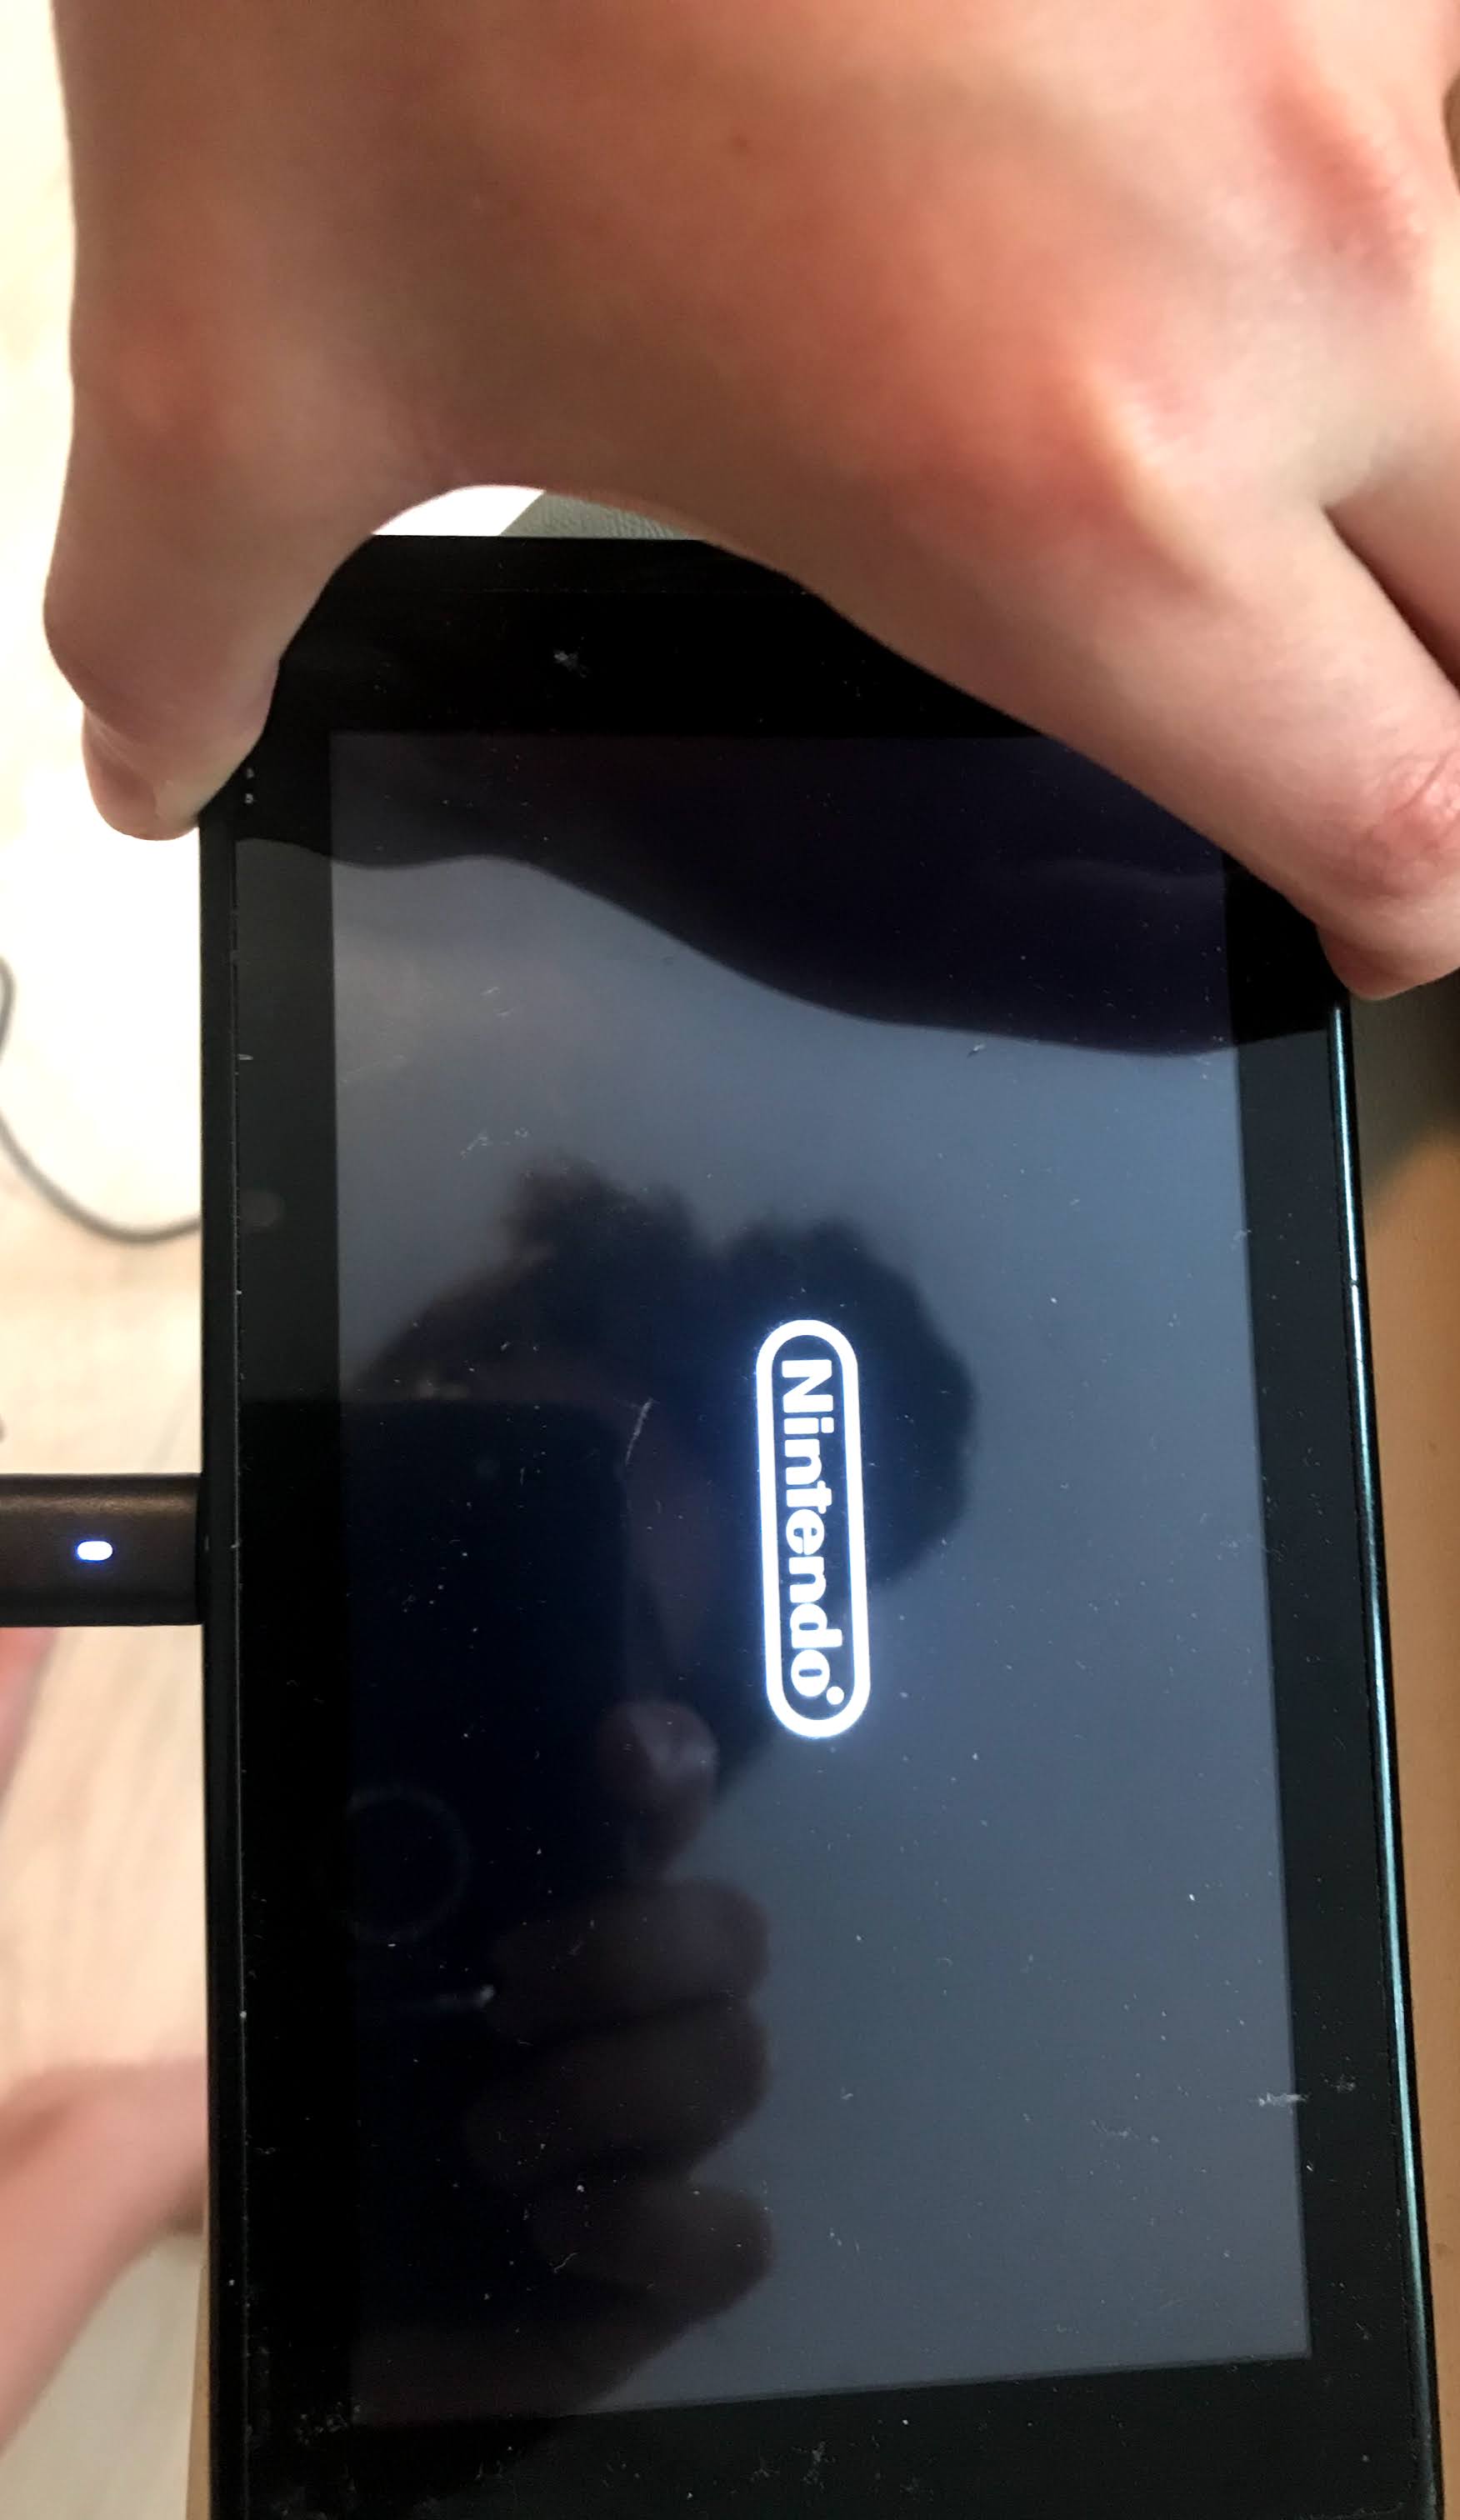 Nintendont Forwarder black screen after Wii Logo · Issue #581